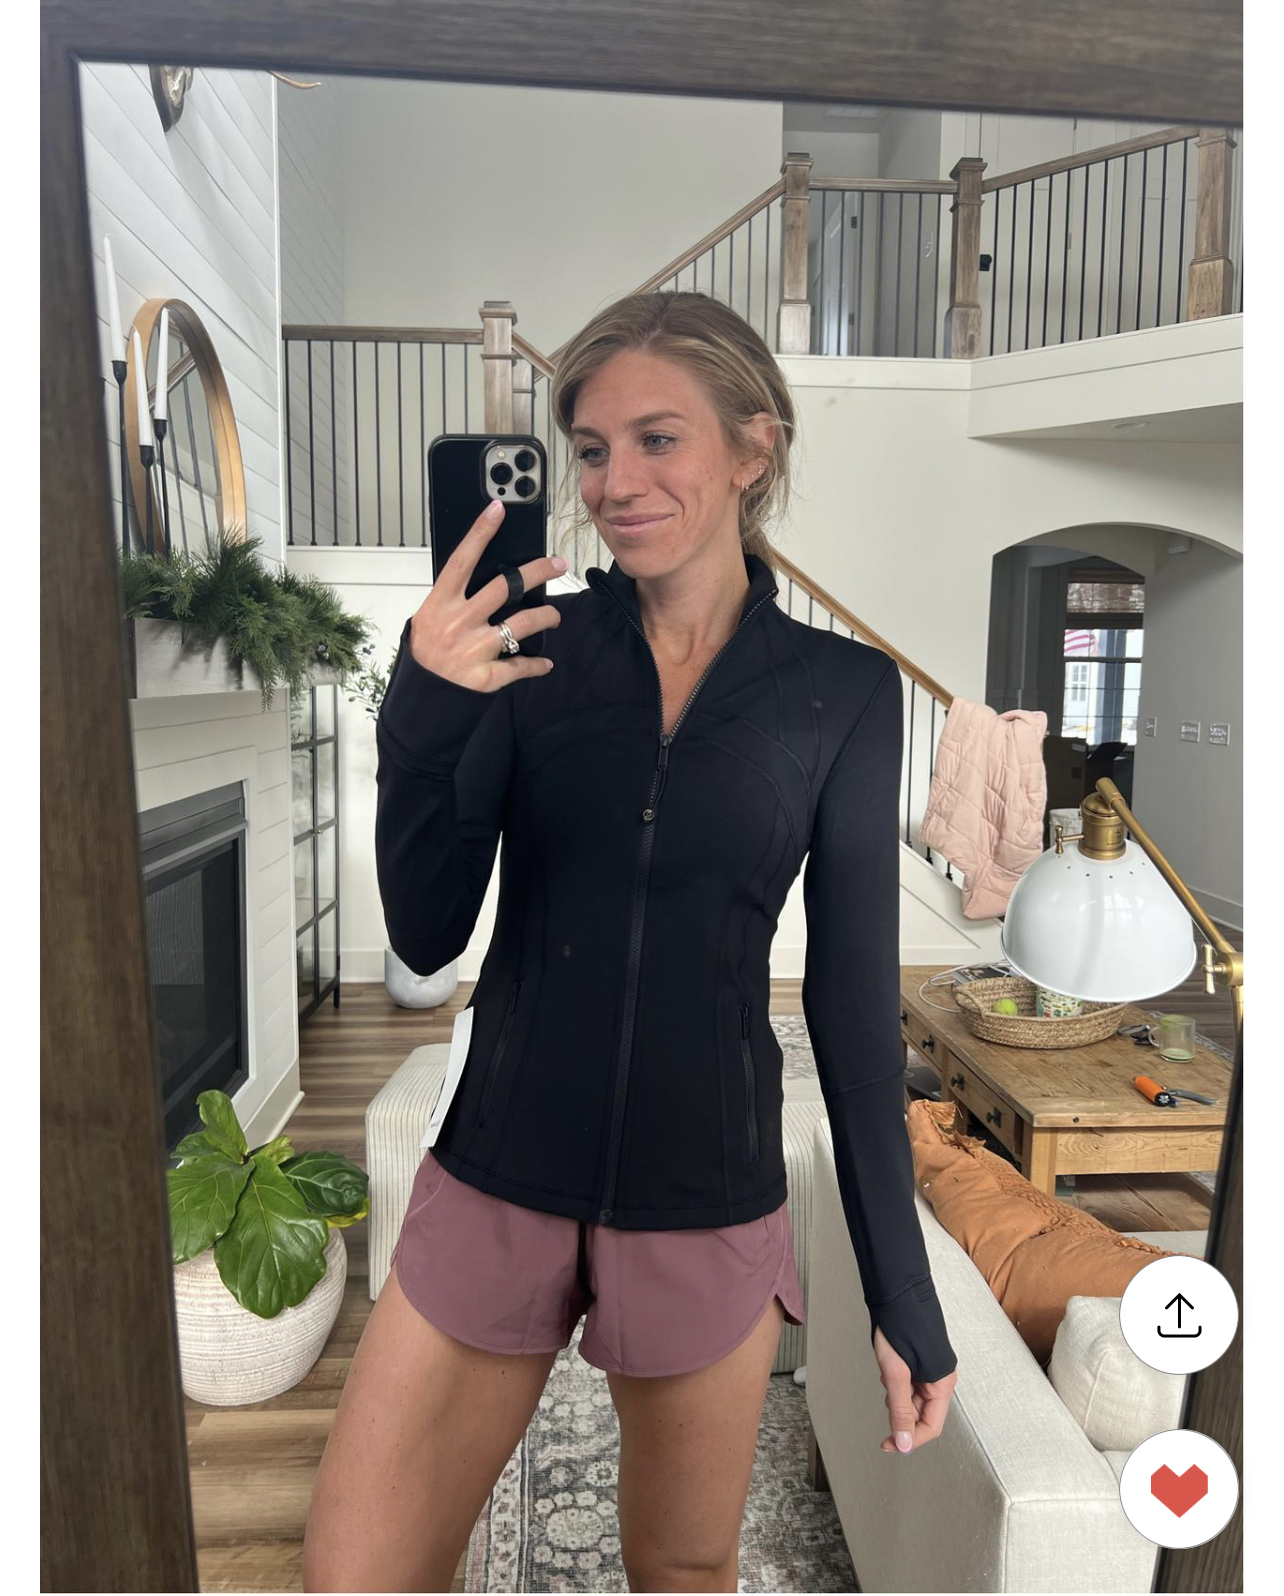 hiking outfit lululemon black active jacket and workout outfit